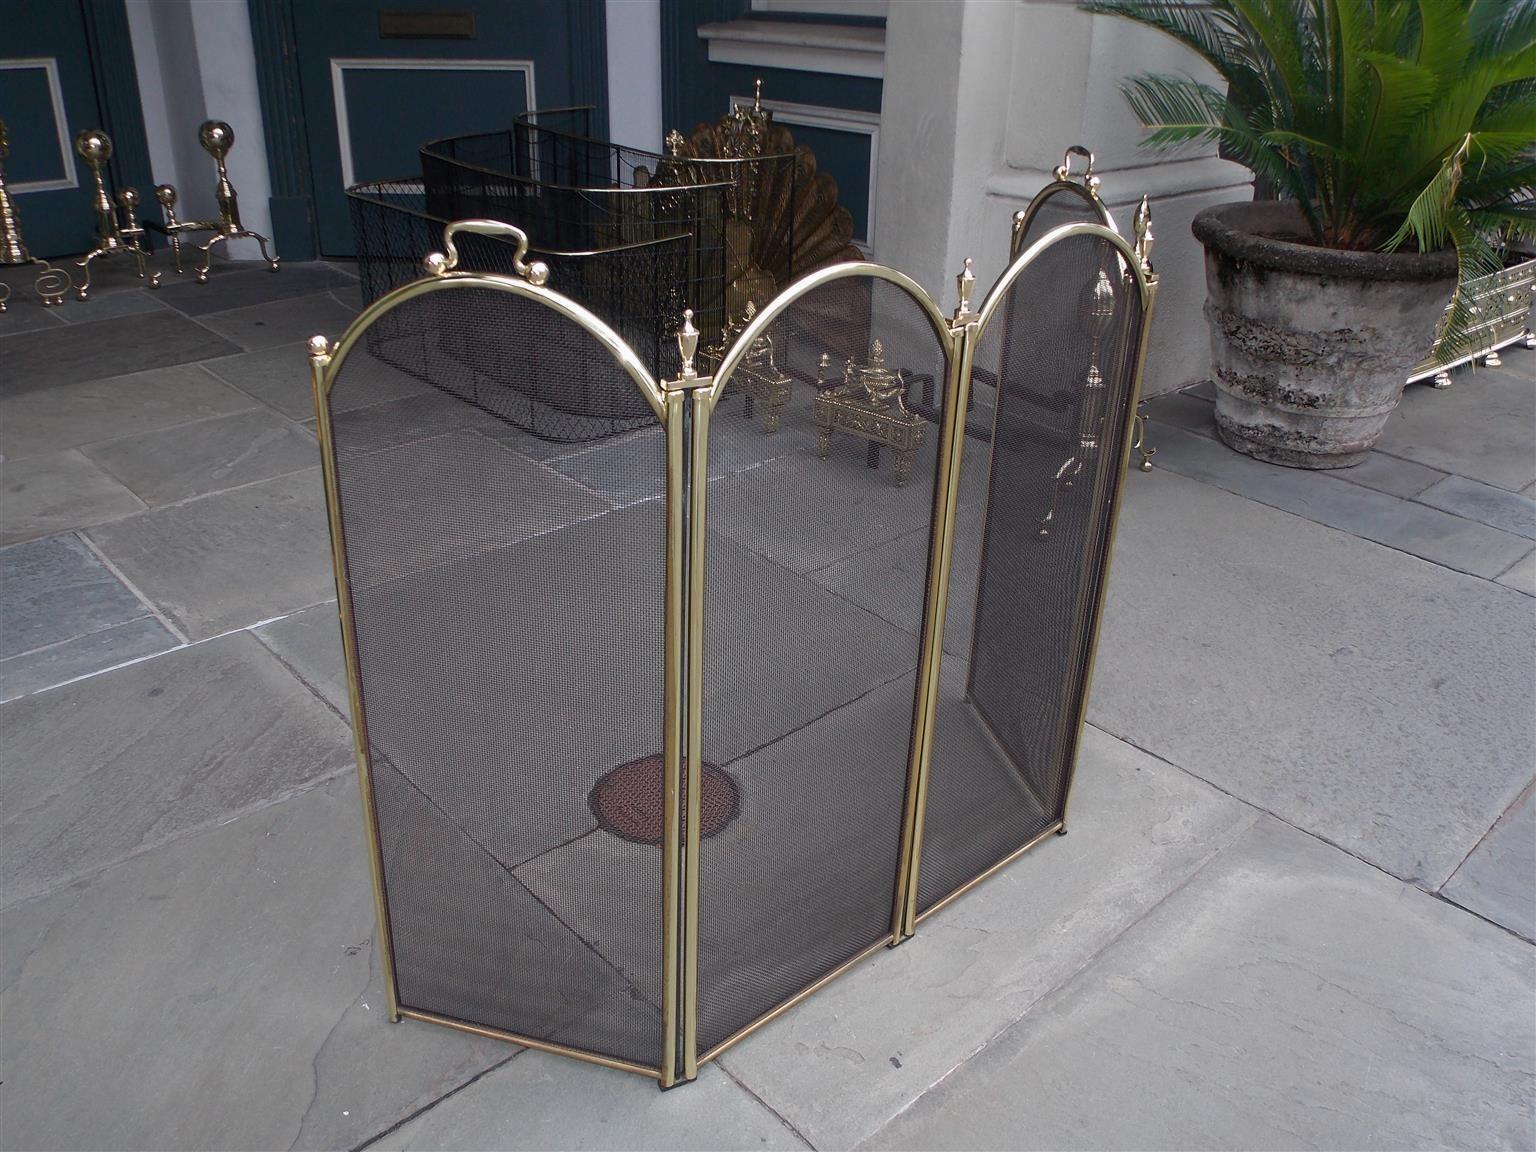 American brass and wire folding four panel arched fireplace screen with flanking side handles and urn finials, Late 19th century.